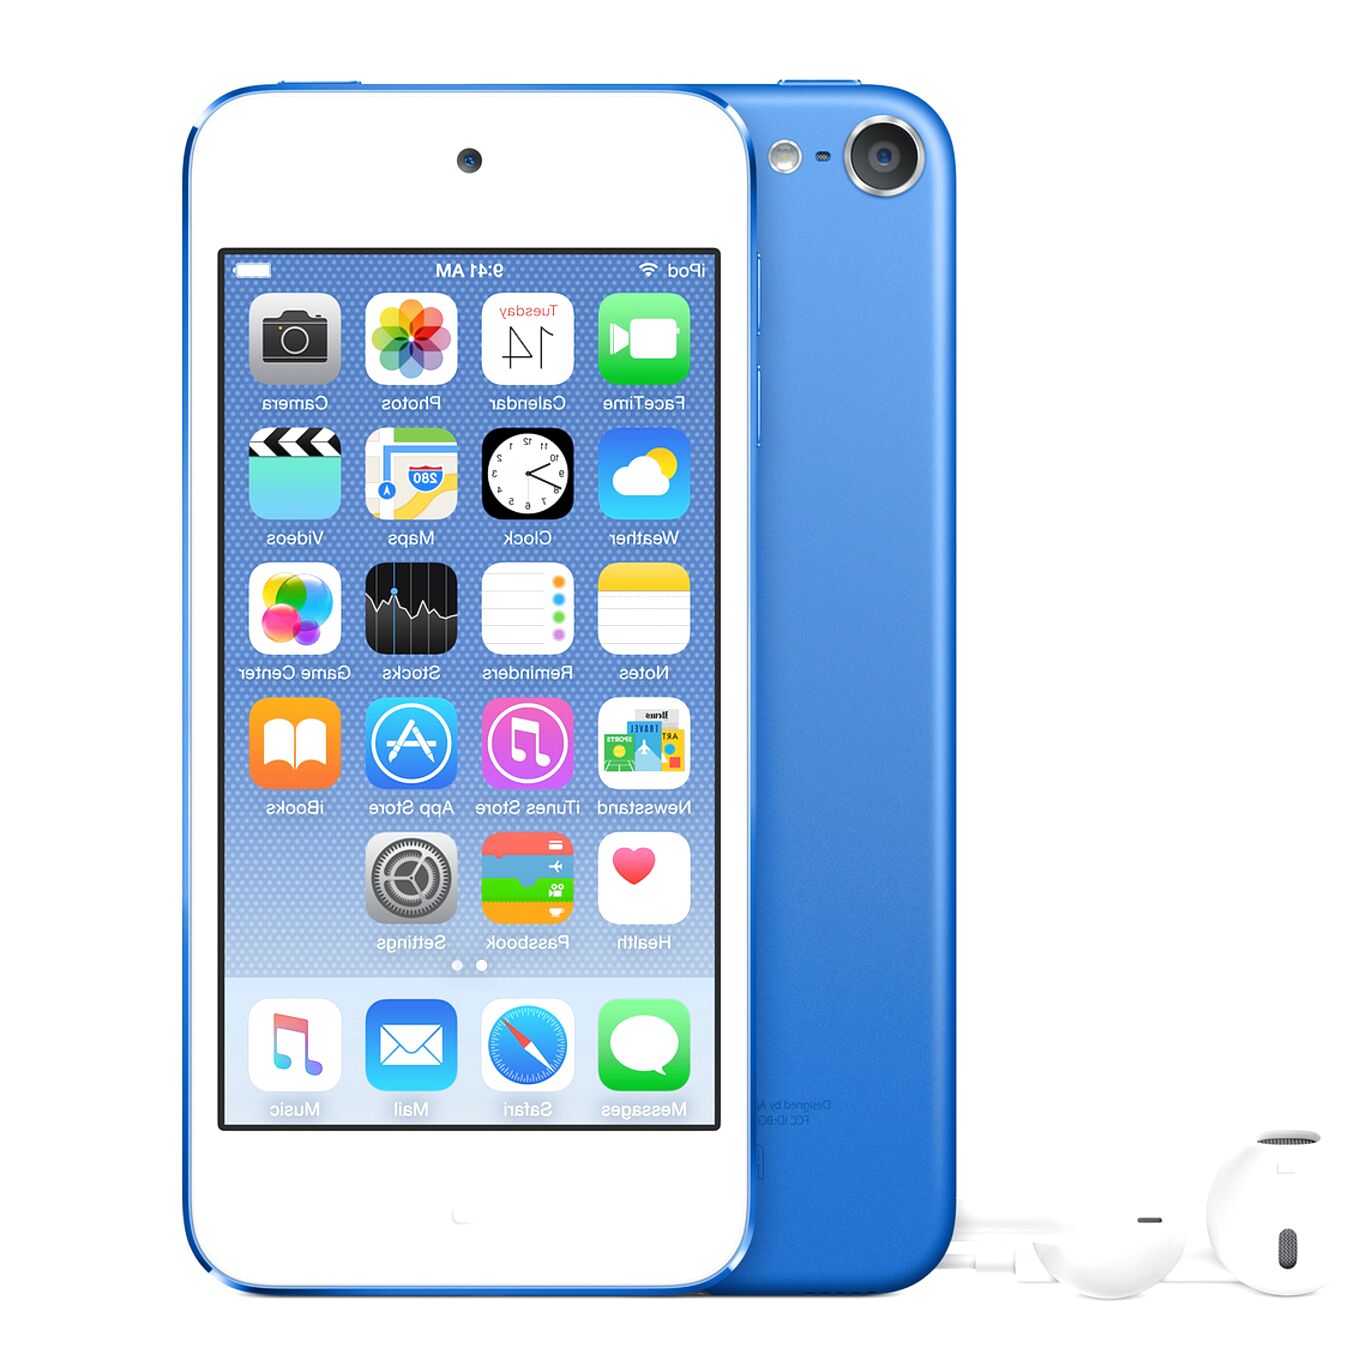 Ipod Touch 6Th Generation 32Gb for sale in UK | 59 used Ipod Touch 6Th